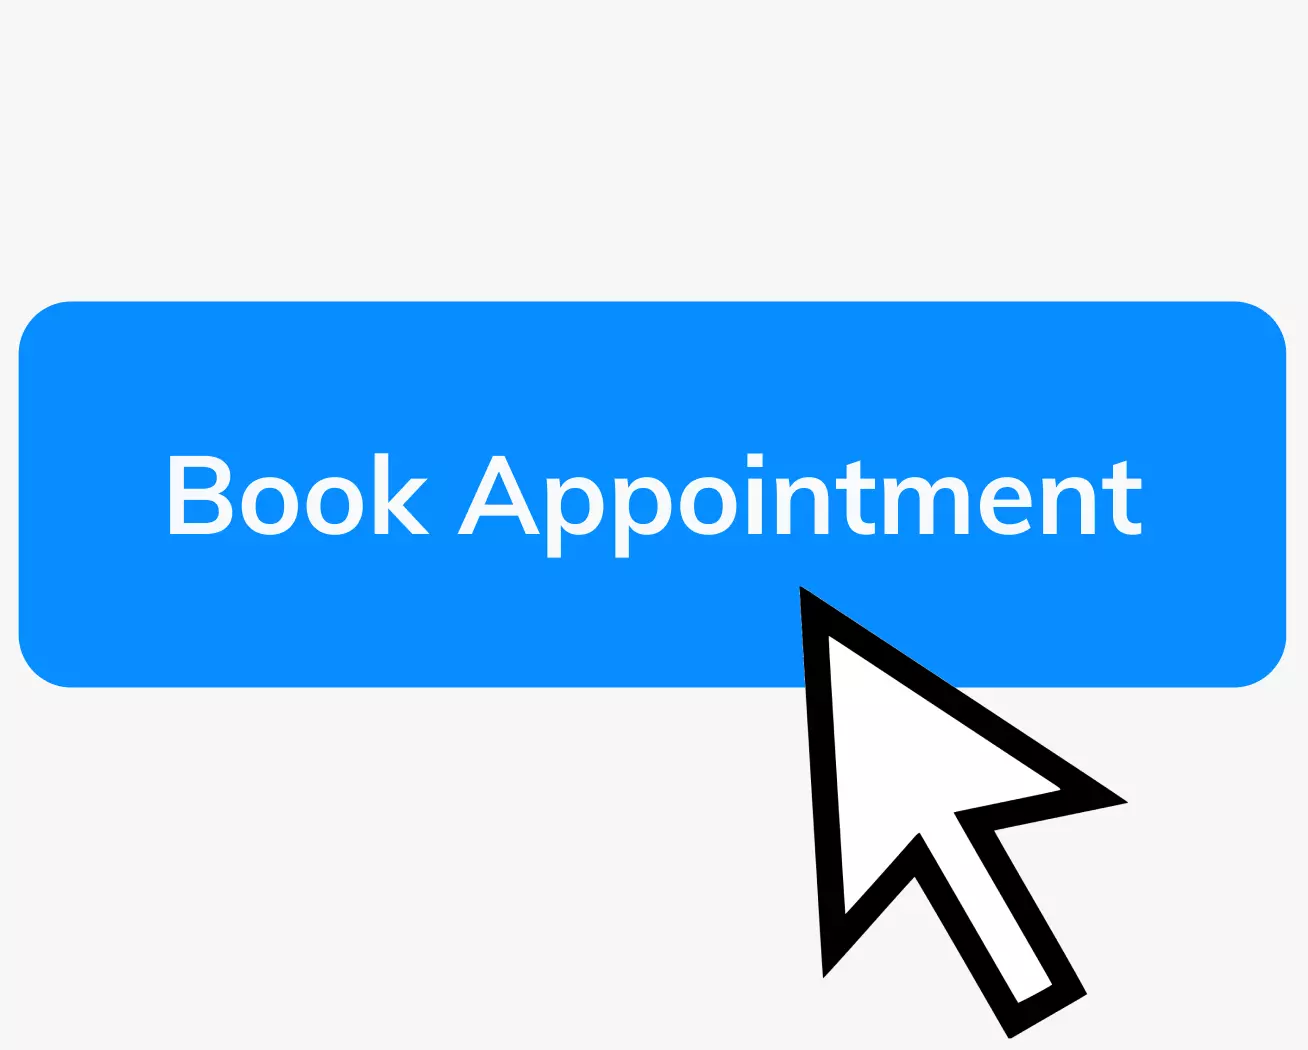 BOOK appointment